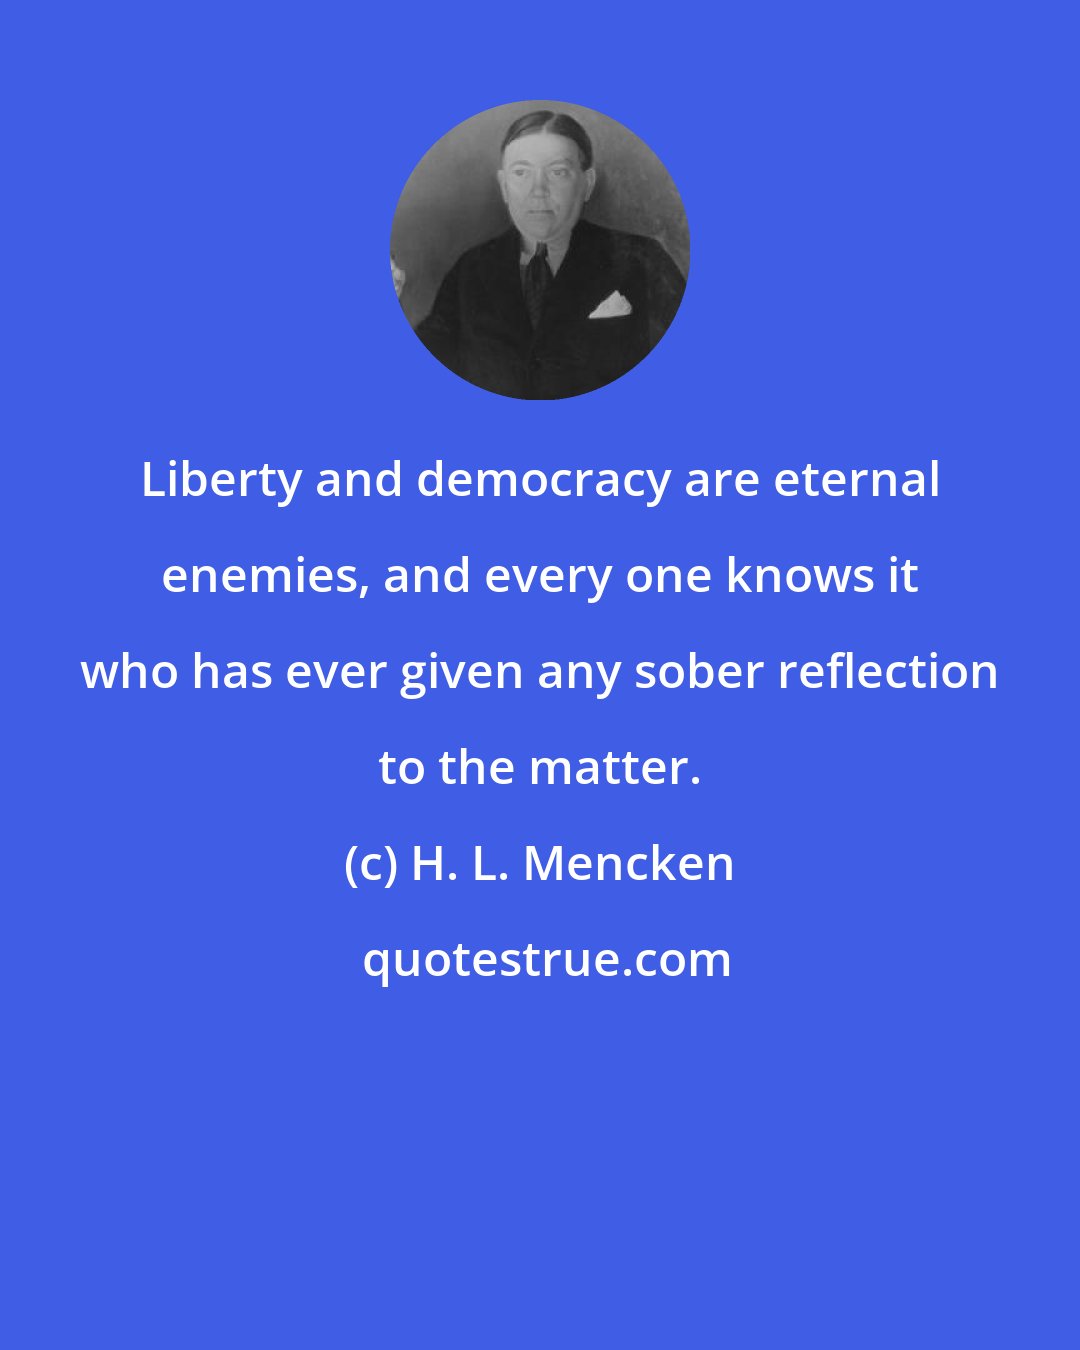 H. L. Mencken: Liberty and democracy are eternal enemies, and every one knows it who has ever given any sober reflection to the matter.